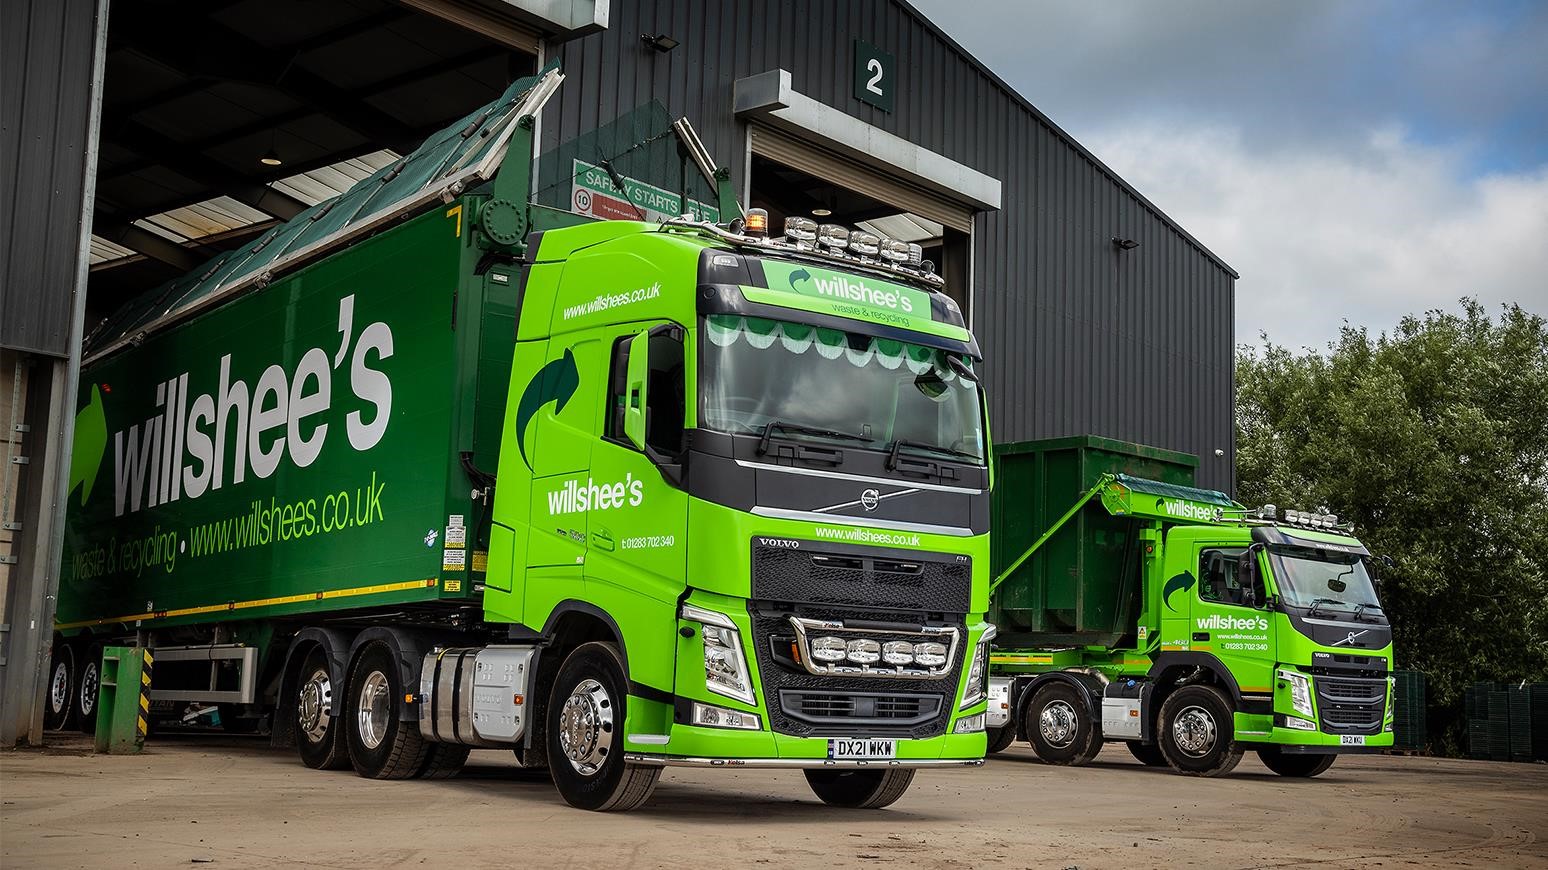 3 New Volvo Trucks Join Willshees Waste & Recycling With 3 More On The Way